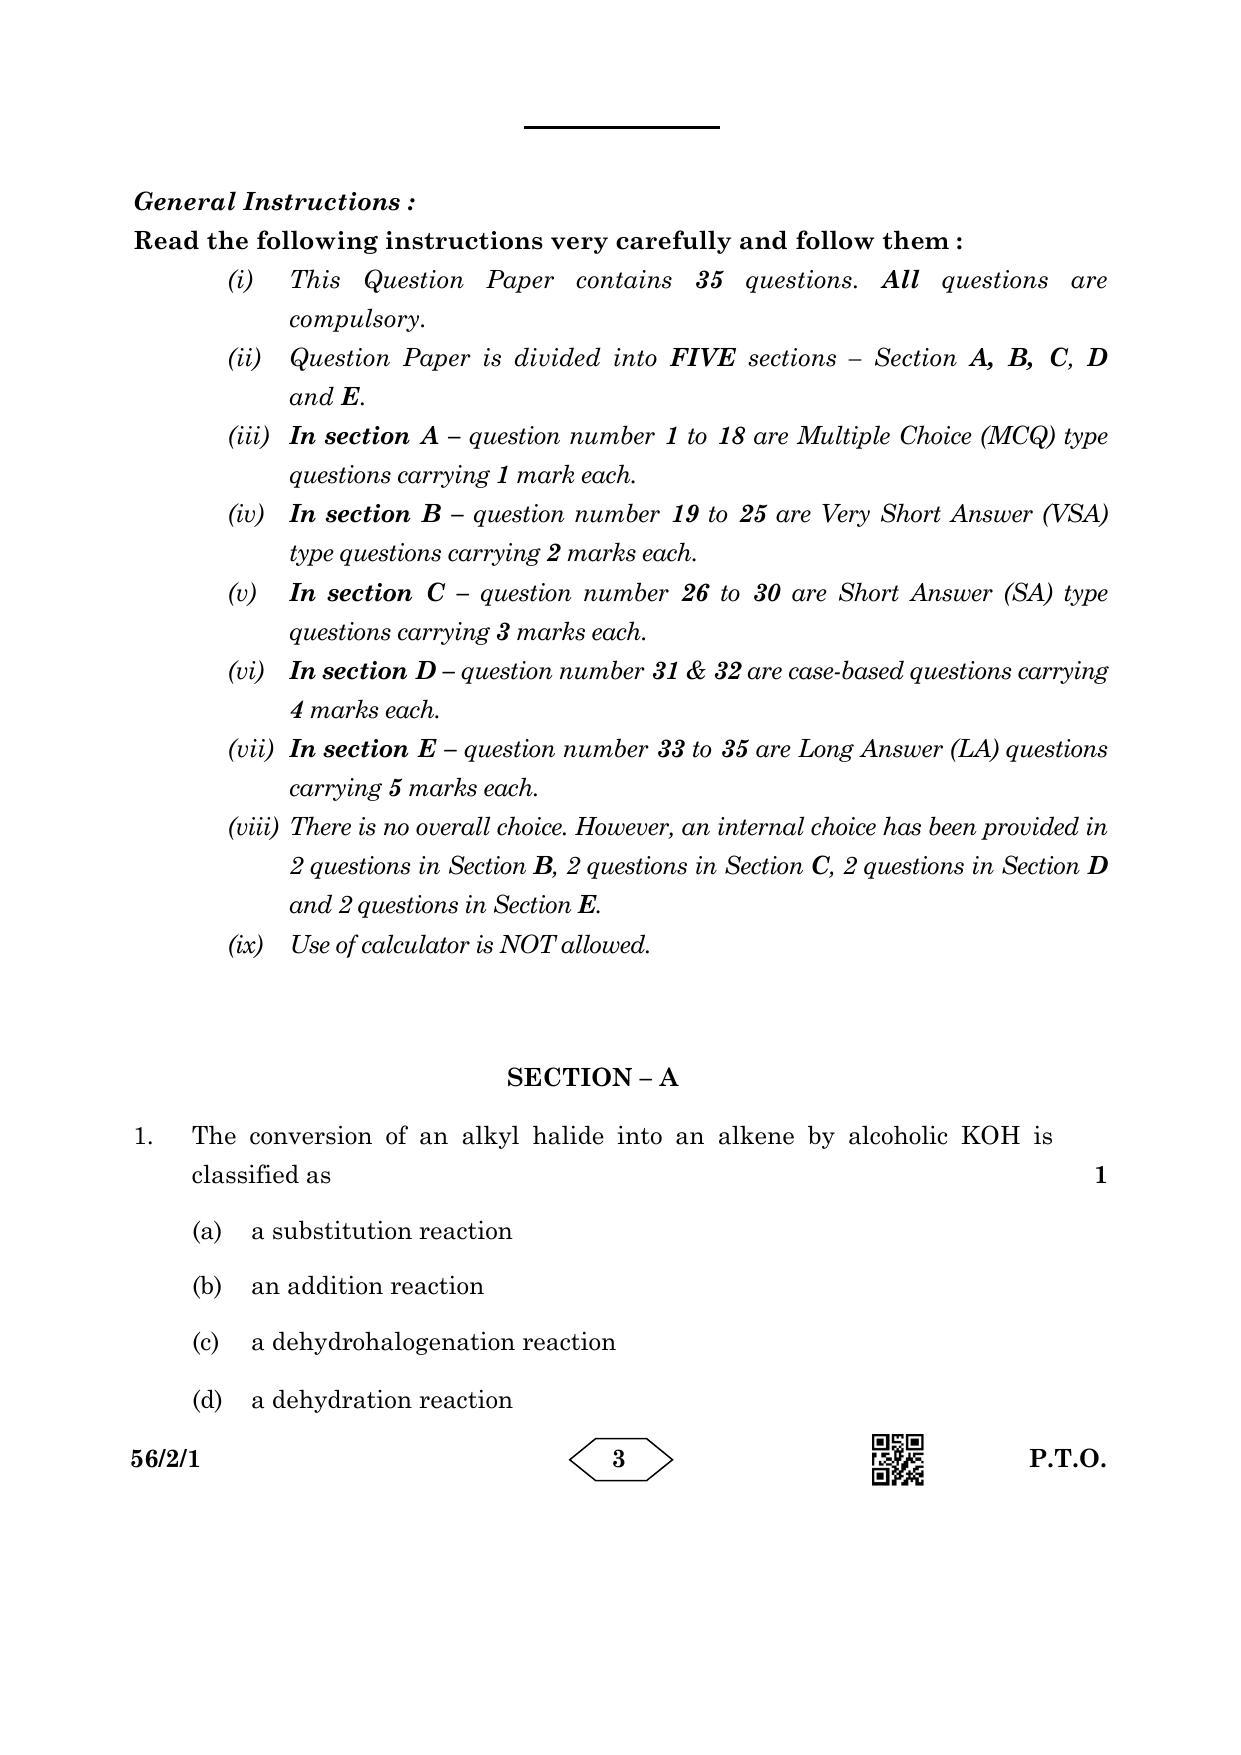 CBSE Class 12 56-2-1 Chemistry 2023 Question Paper - Page 3